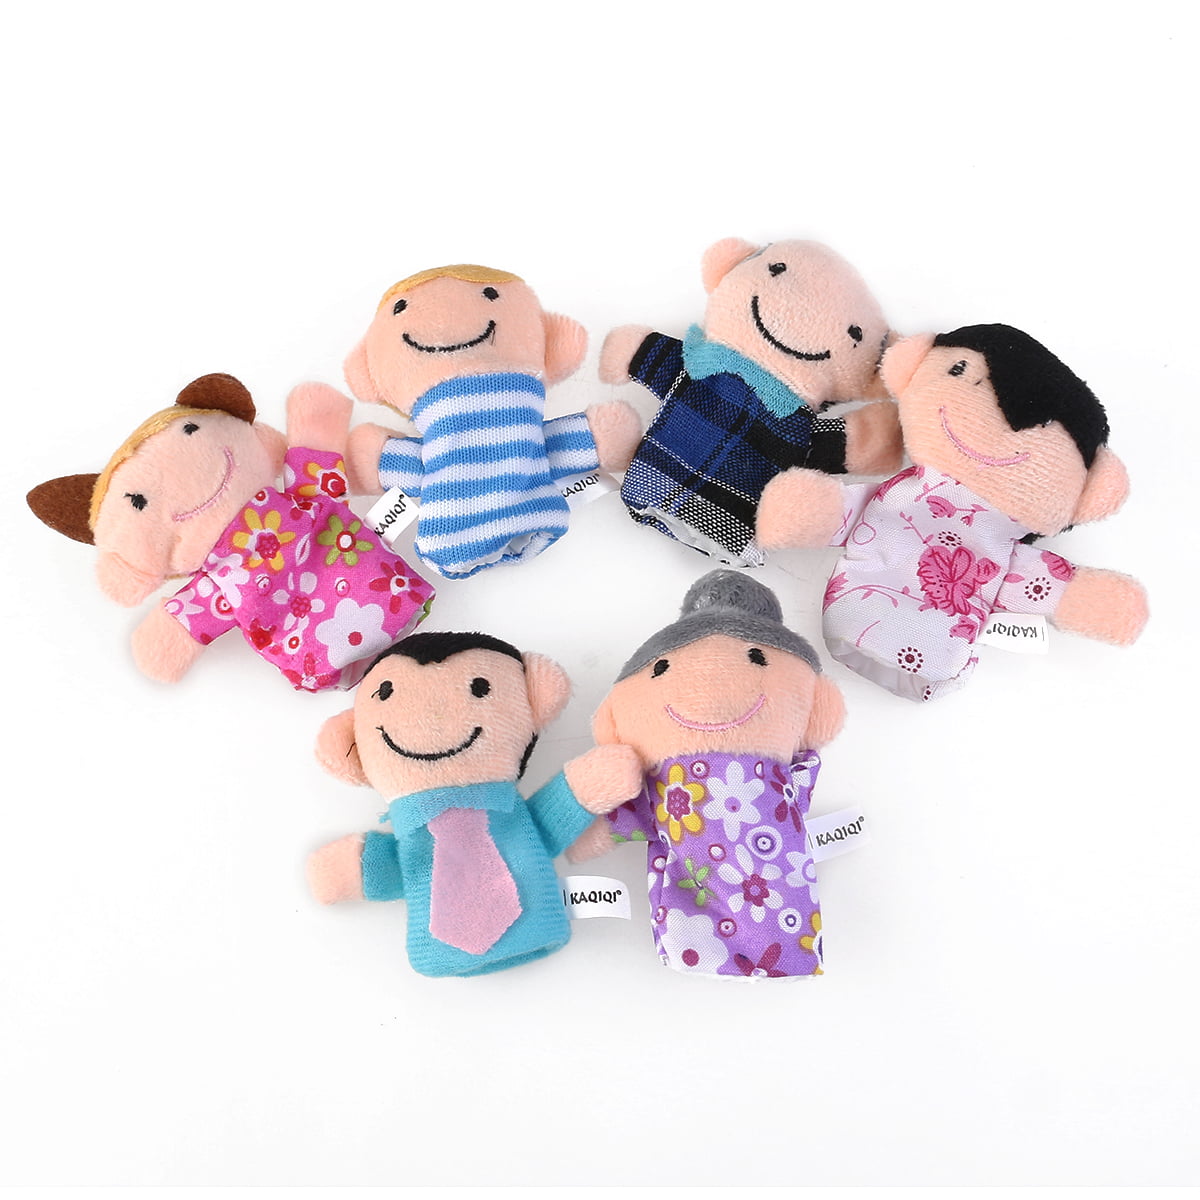 Infant Educational Family Finger Puppets Doll Hand Toy Story Children Gift HS3 